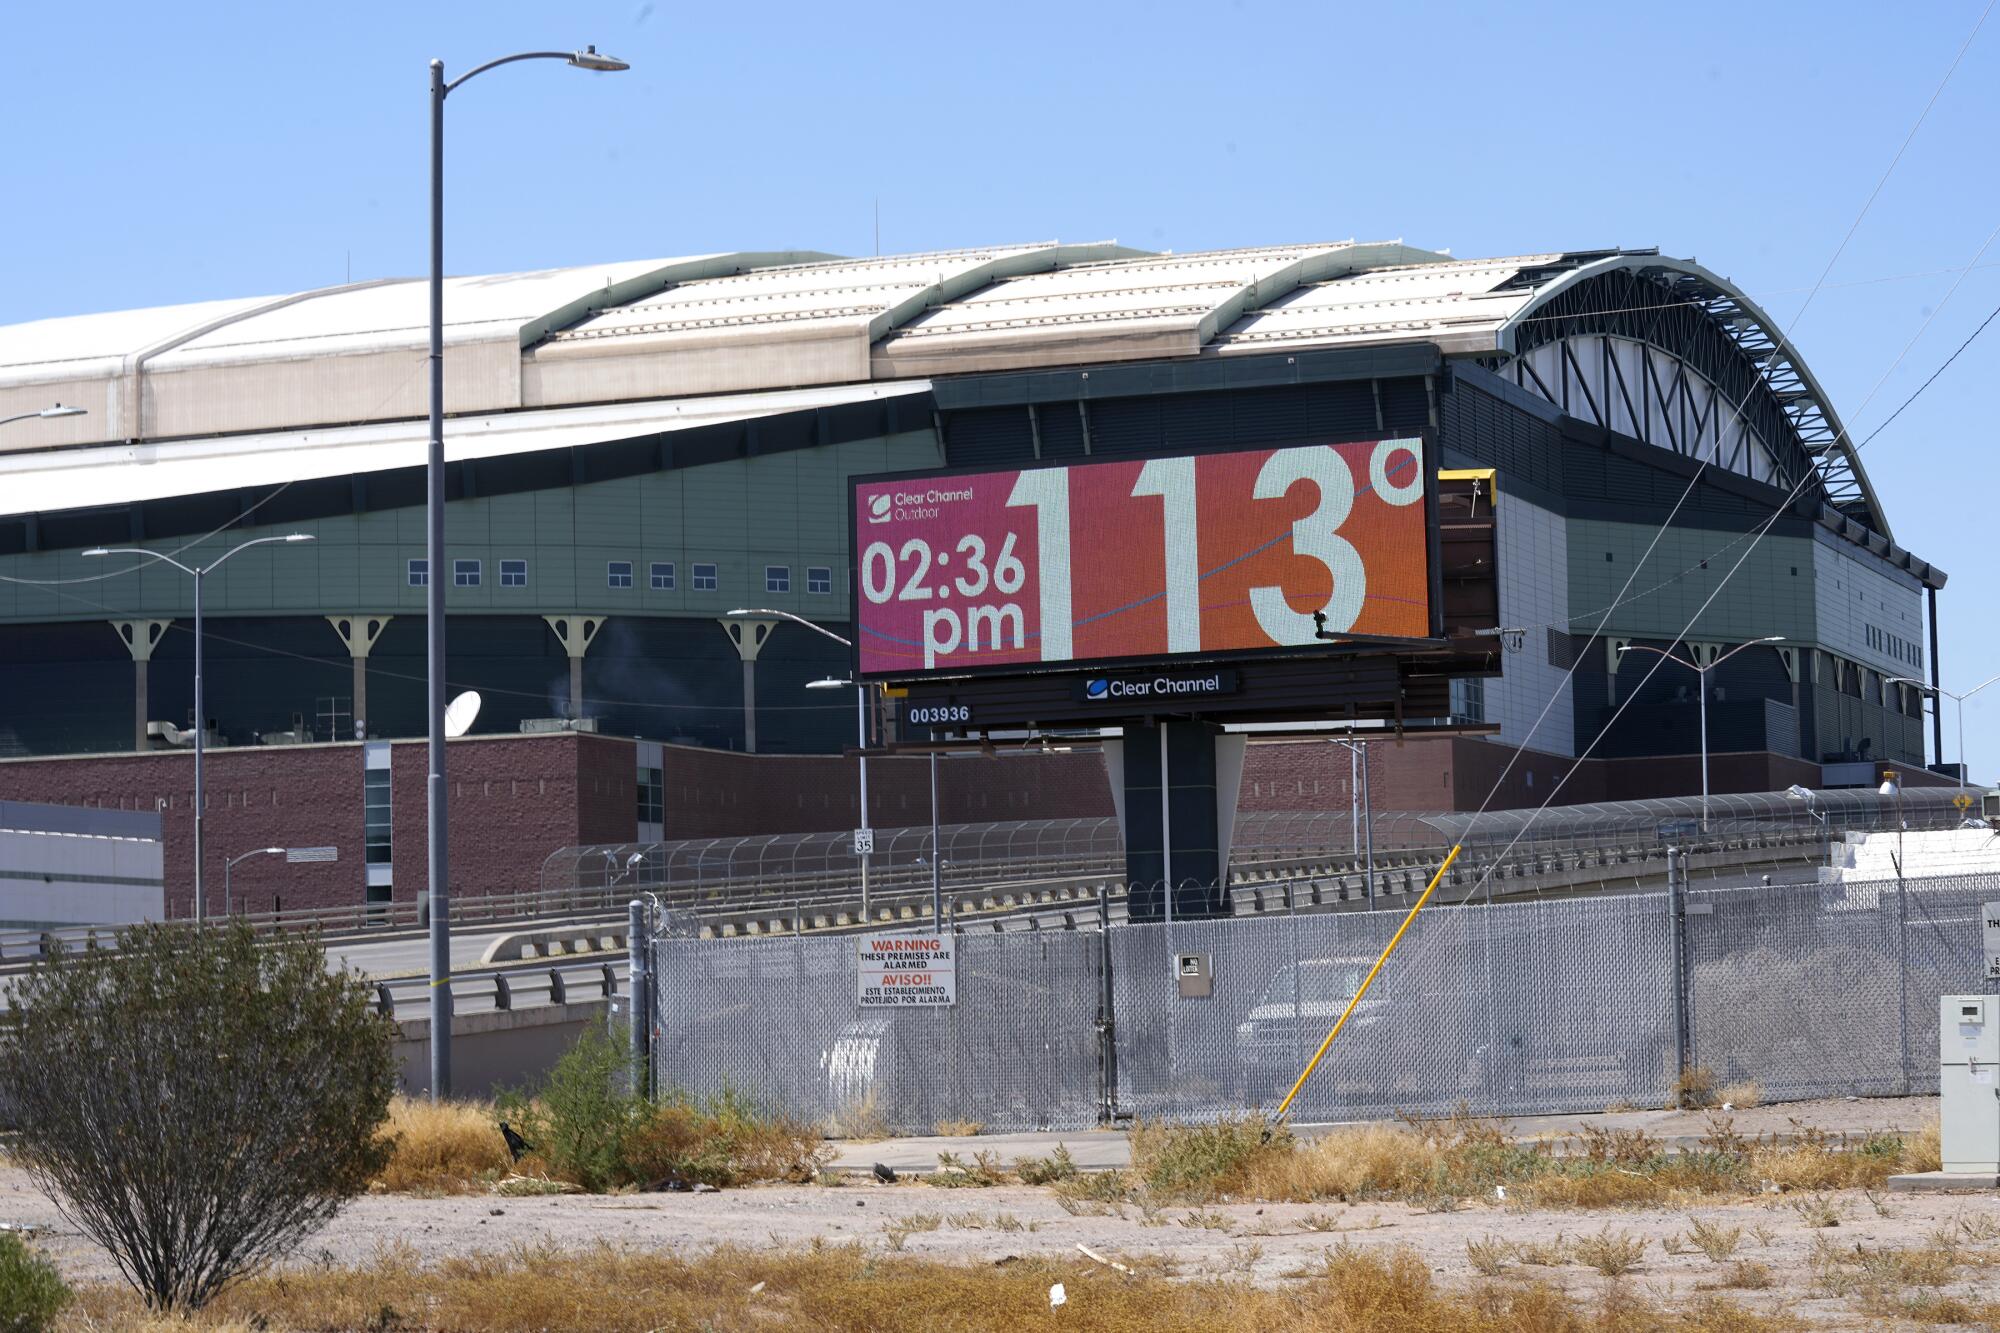 A digital billboard on a building shows a temperature of 113 degrees at 2:36 p.m.